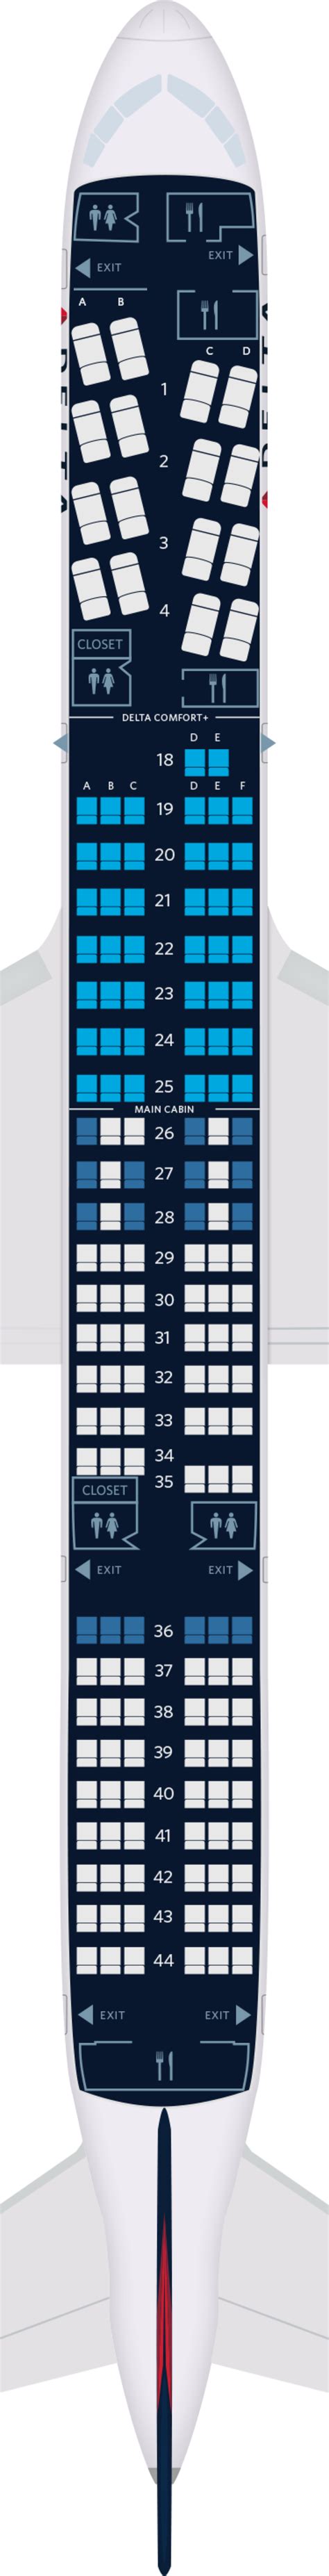 American Boeing 757 200 Seating Chart Elcho Table